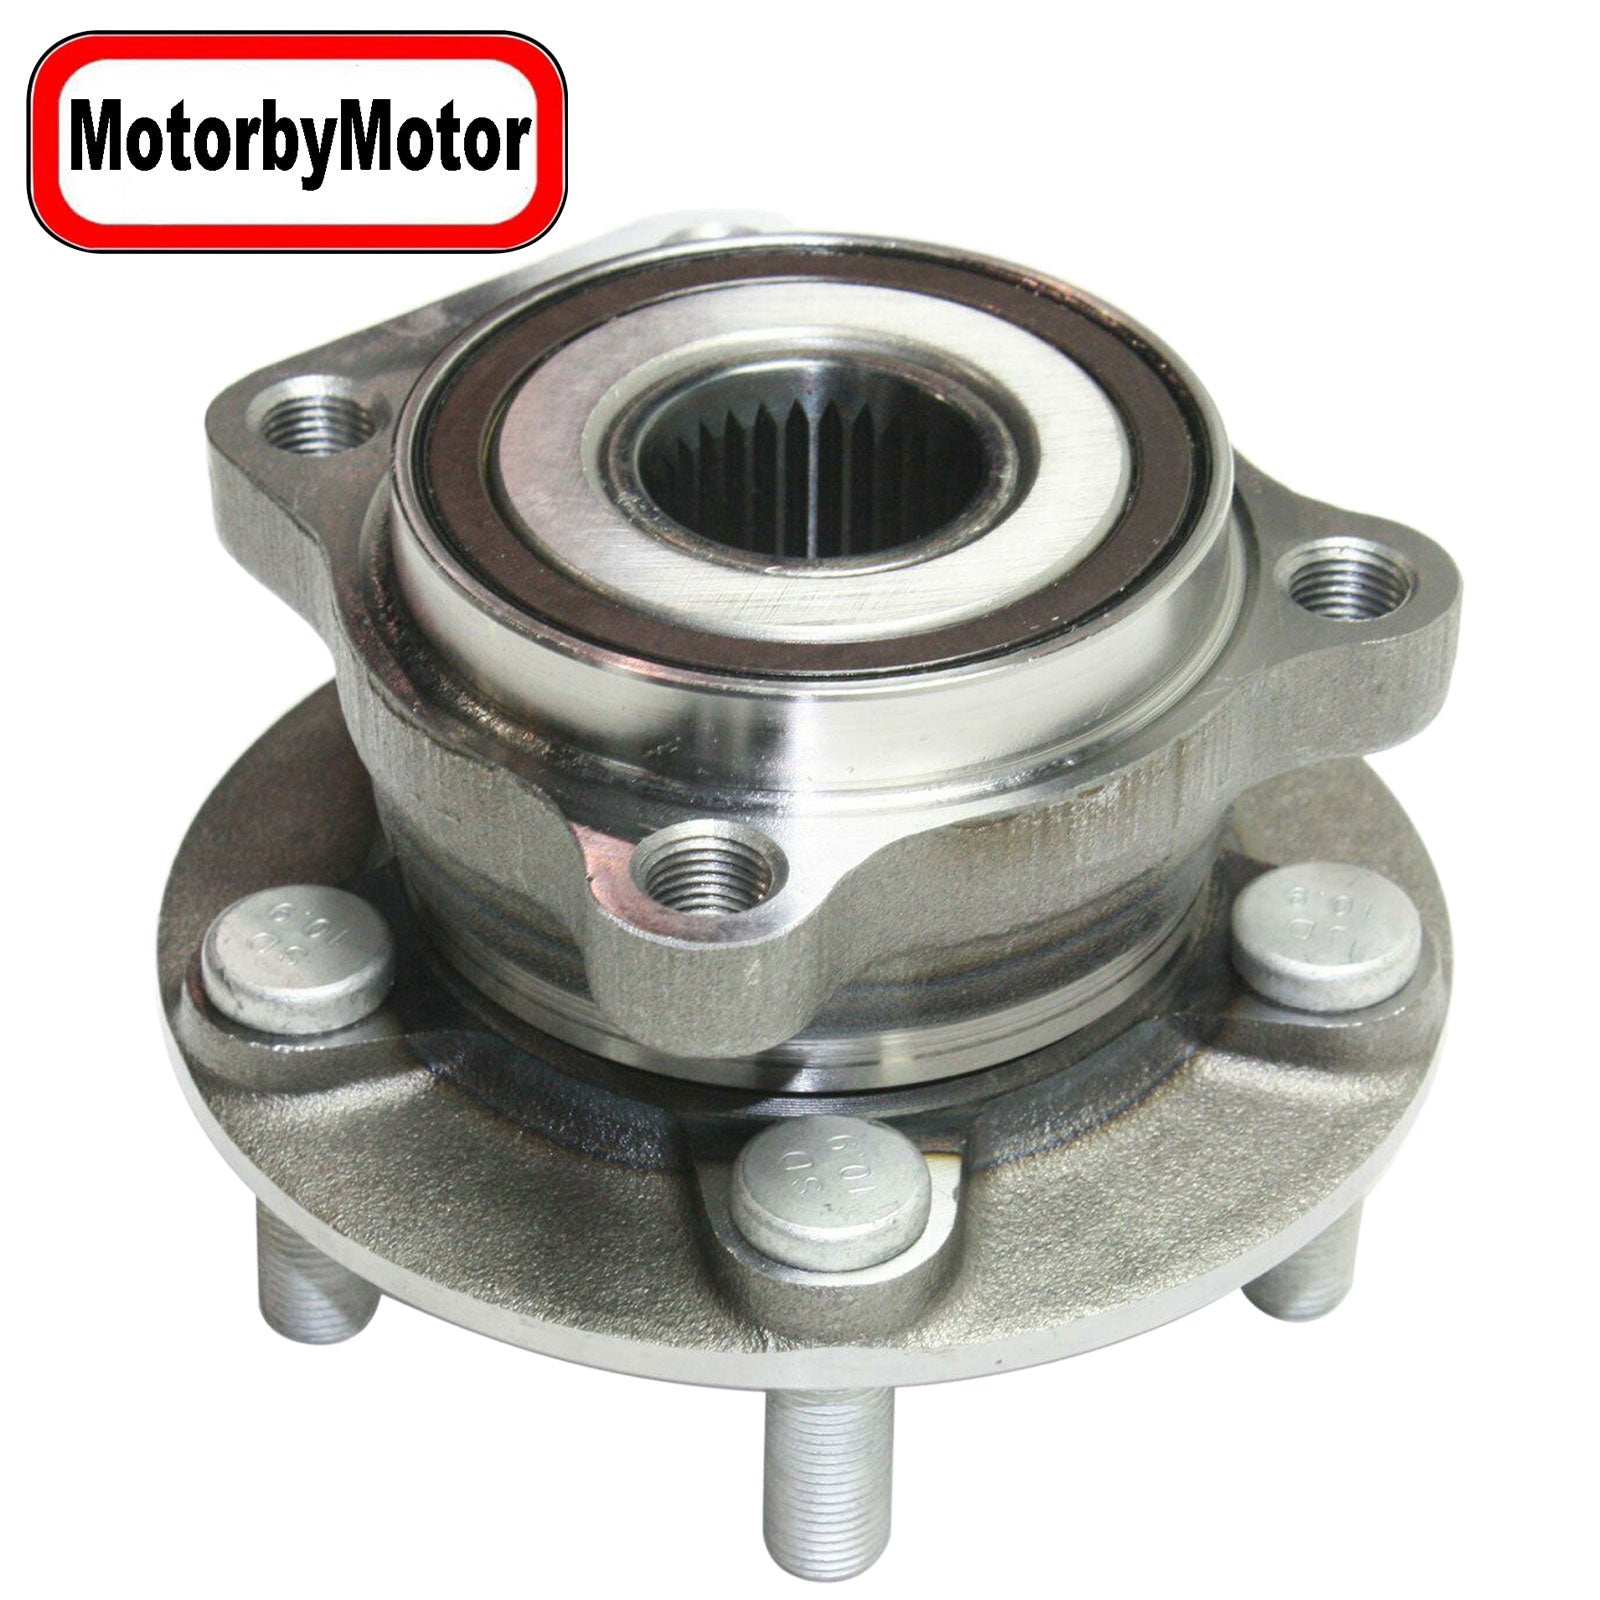 MotorbyMotor 513303 Front Wheel Bearing and Hub Assembly with 5 Lugs Fits for Subaru Forester Impreza Sport XV Crosstrek WRX Impreza Low-Runout OE Directly Replacement Hub Bearing (w/ABS) MotorbyMotor